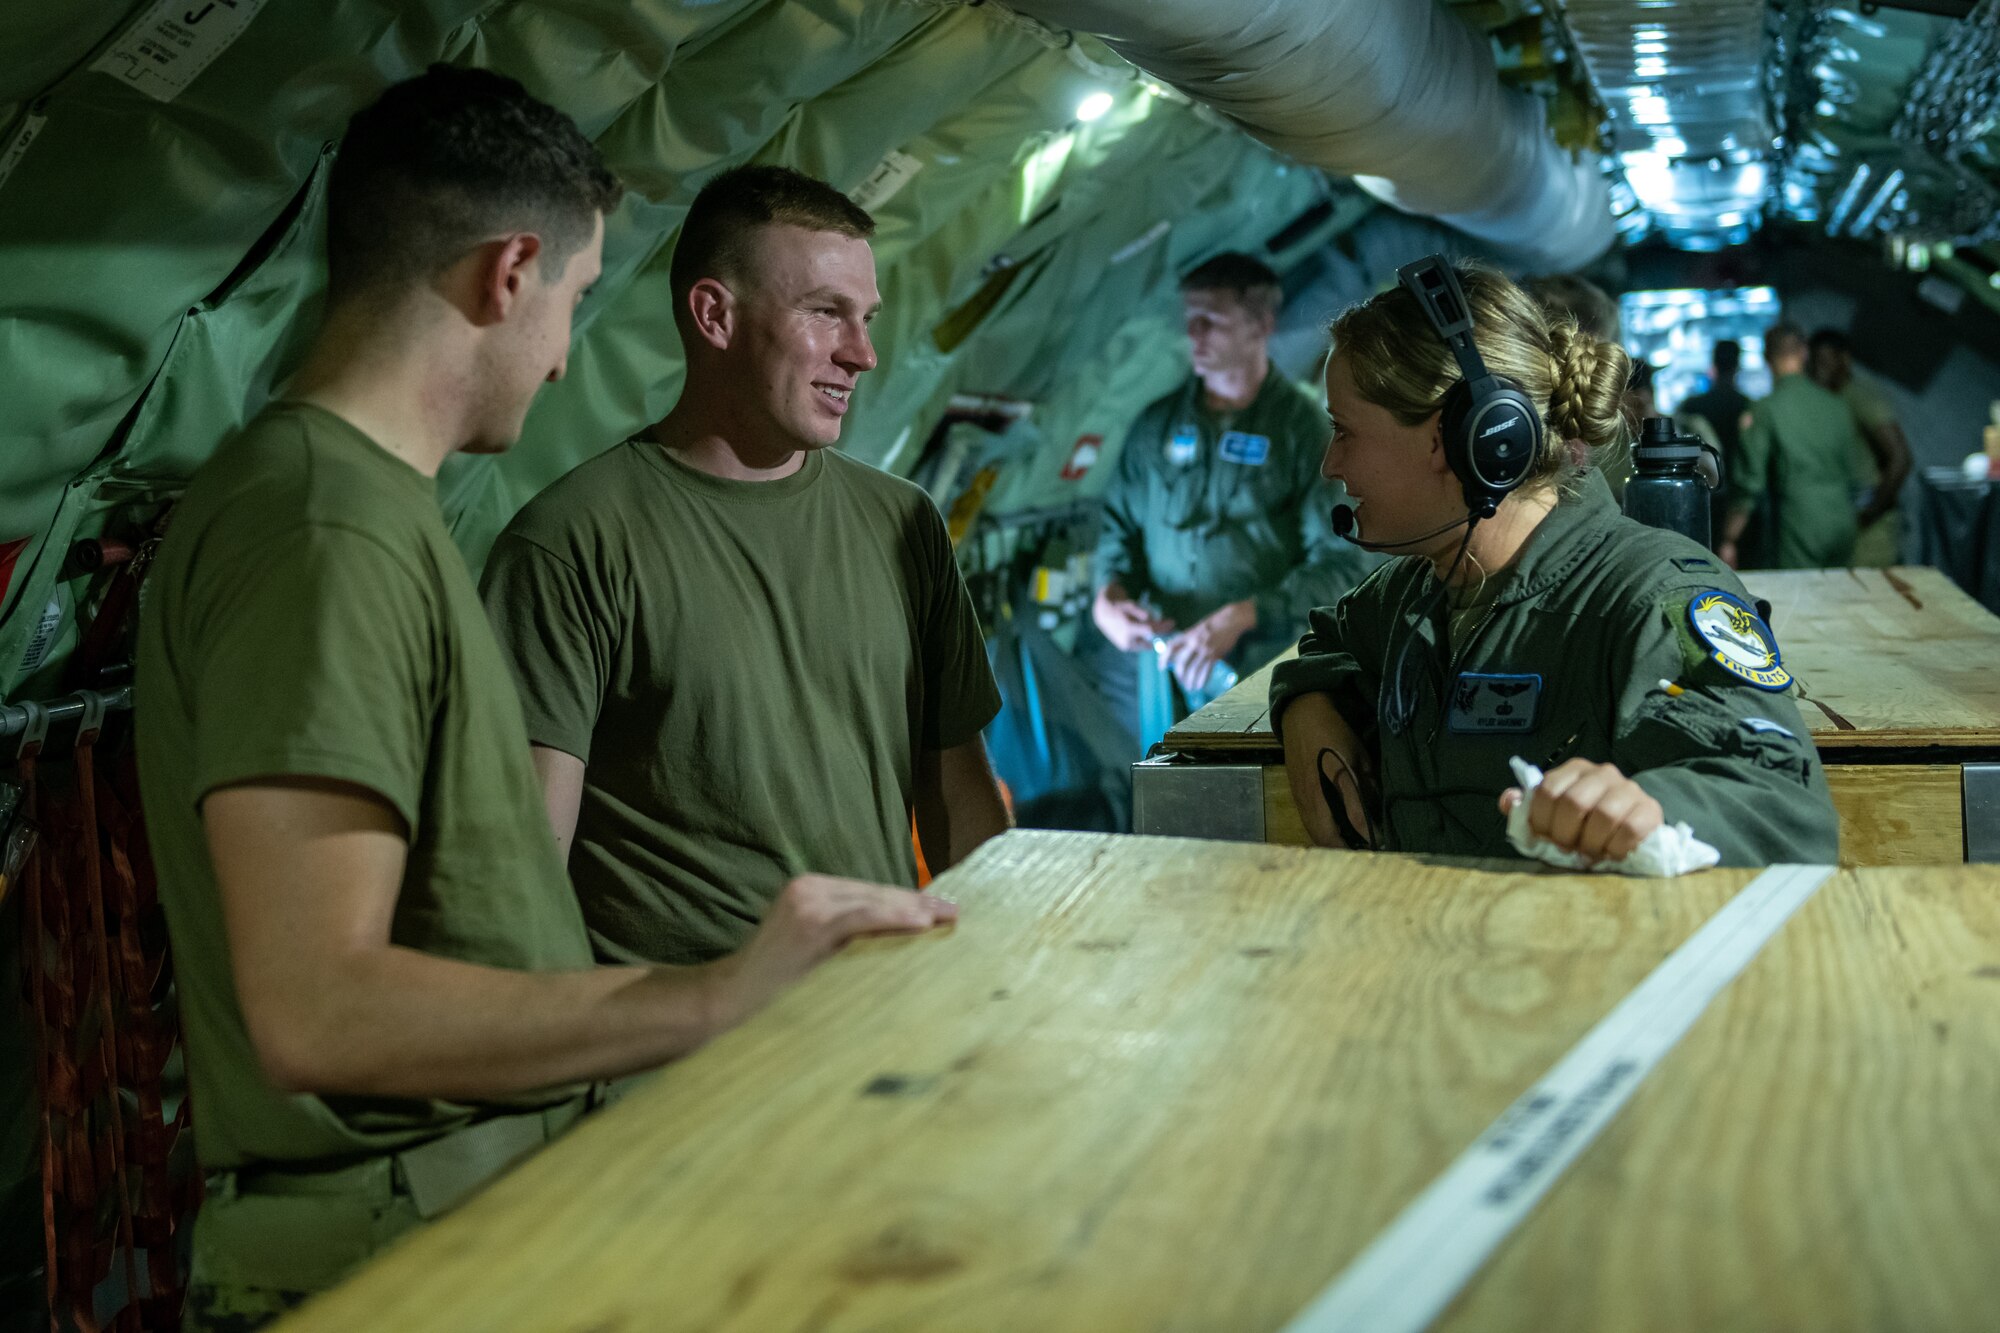 U.S. Air Force Airmen from Ellsworth Air Force Base, S.D., converse with an Iowa Air National Guardsman from the 185th Air Refueling Wing, Iowa Air National Guard, during a flight near Rapid City, S.D., July 21, 2022.